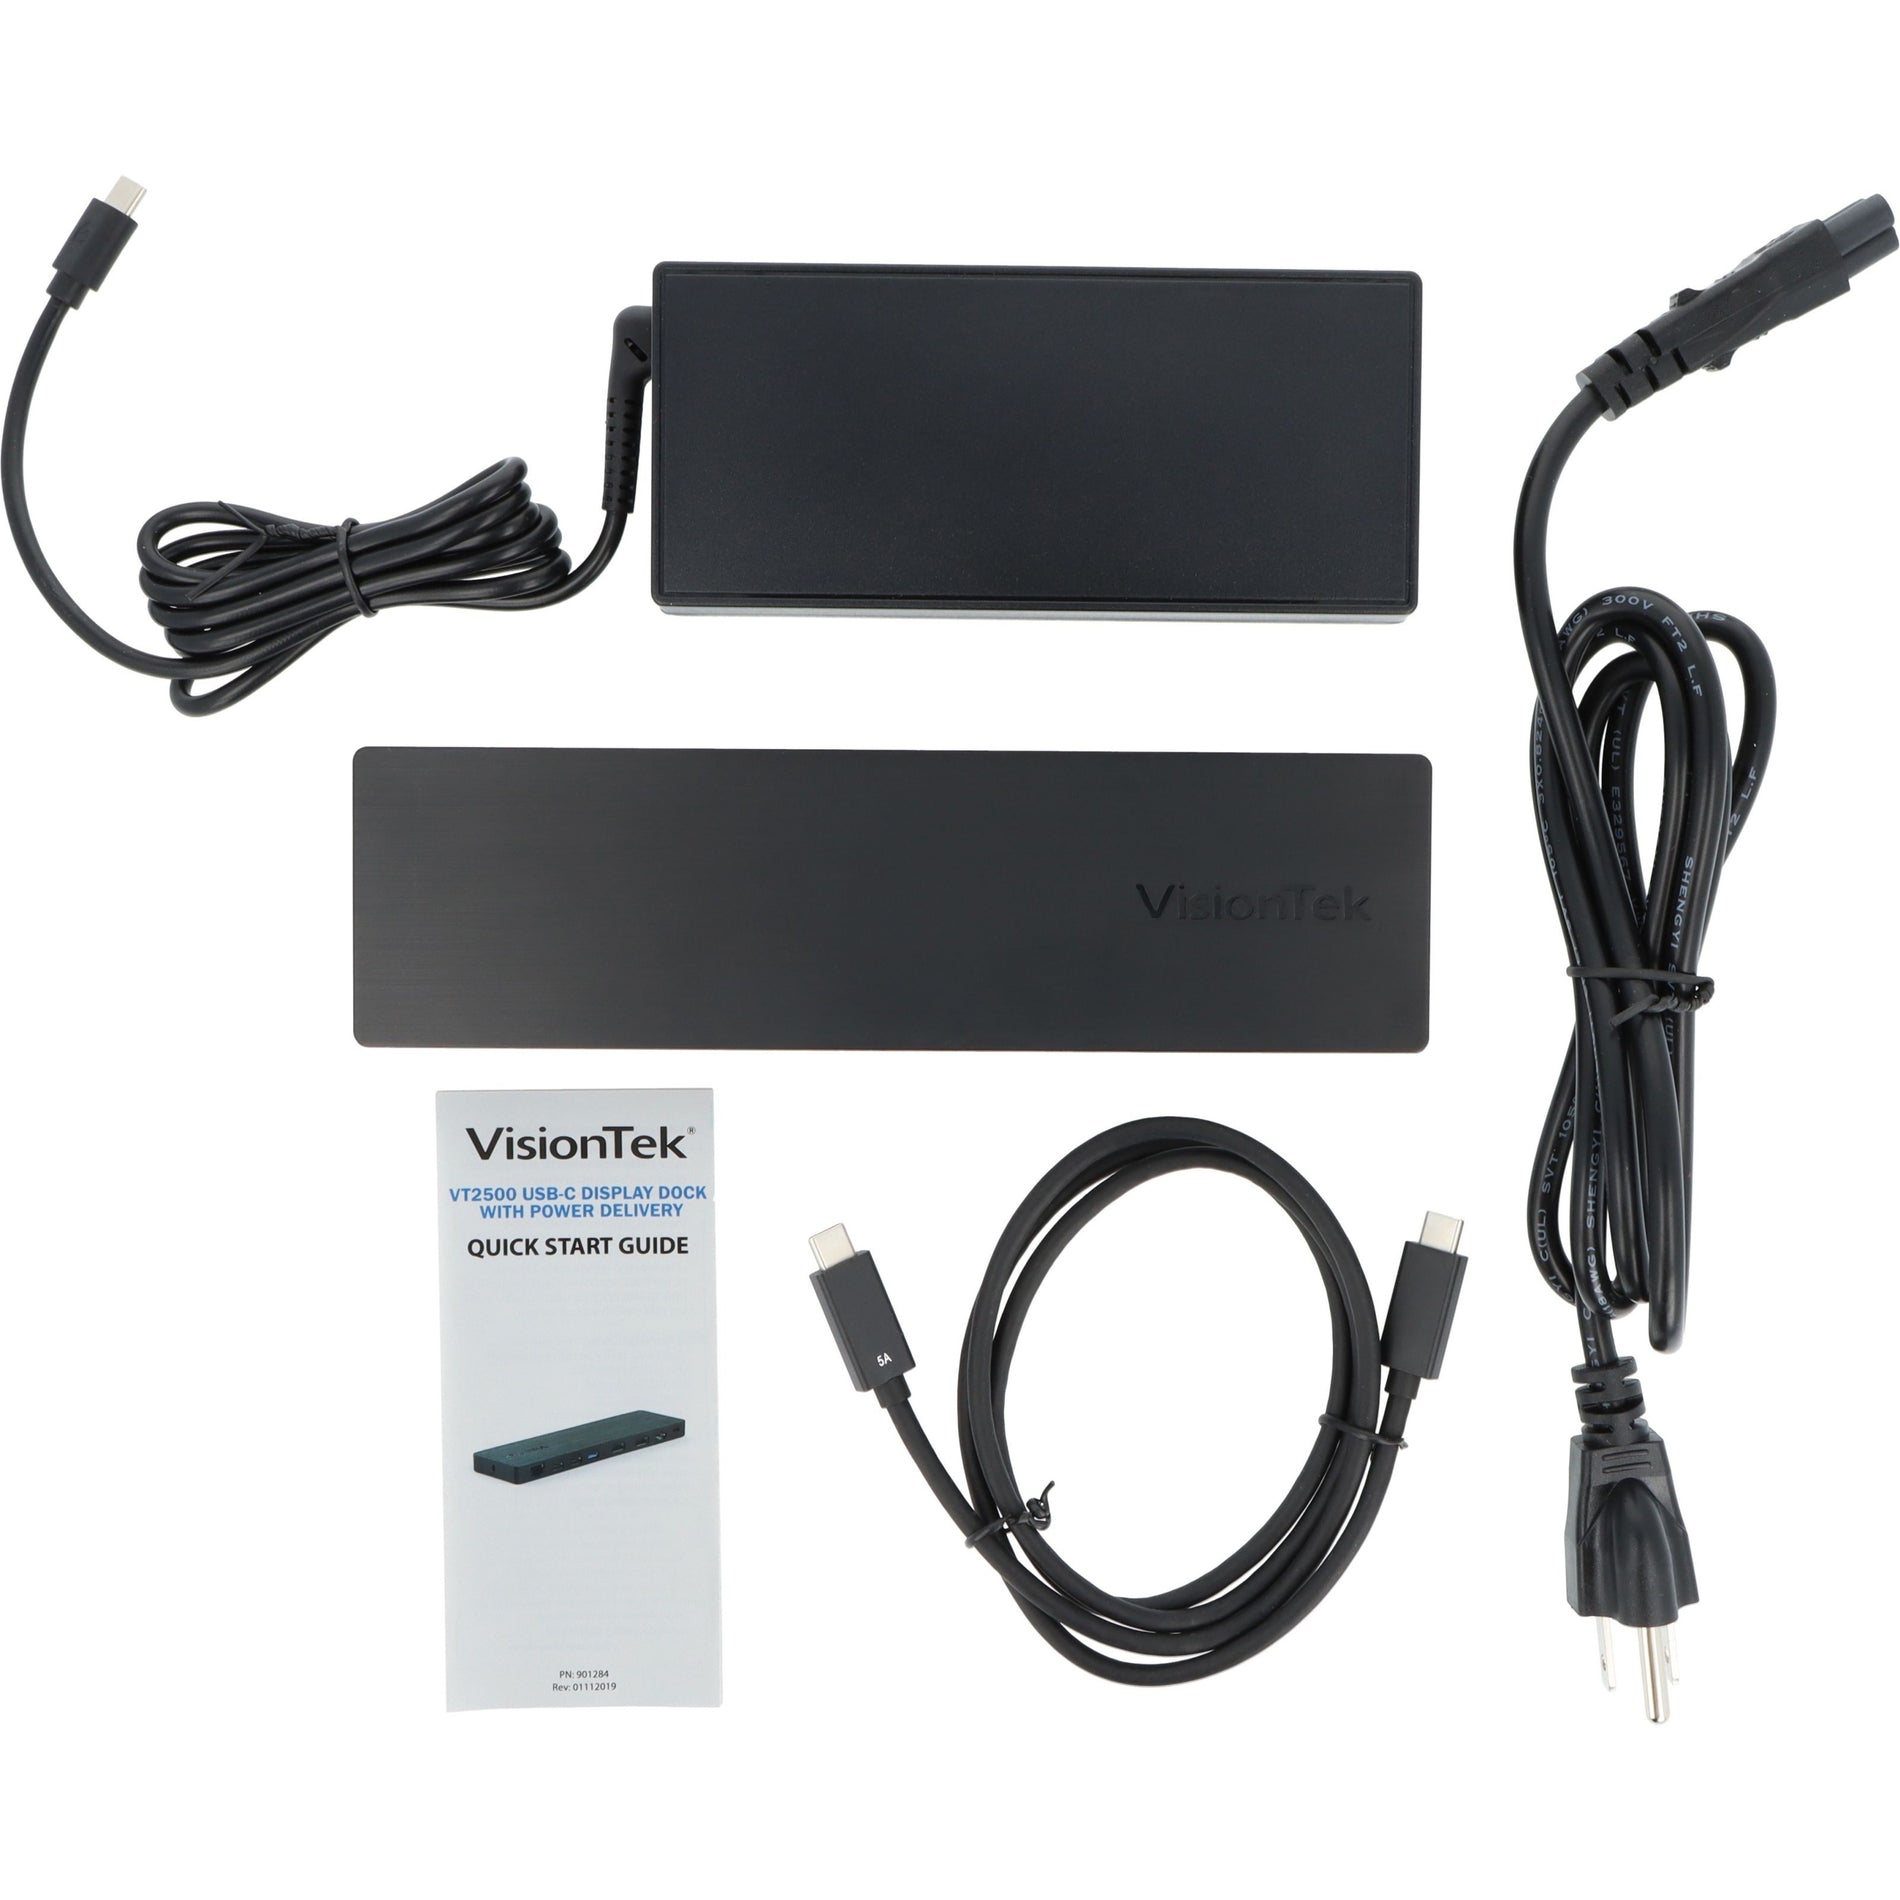 VisionTek 901381 VT2500 Triple Display USB-C Docking Station with Power Delivery, Compatible with Windows, Mac, and Chrome Laptops